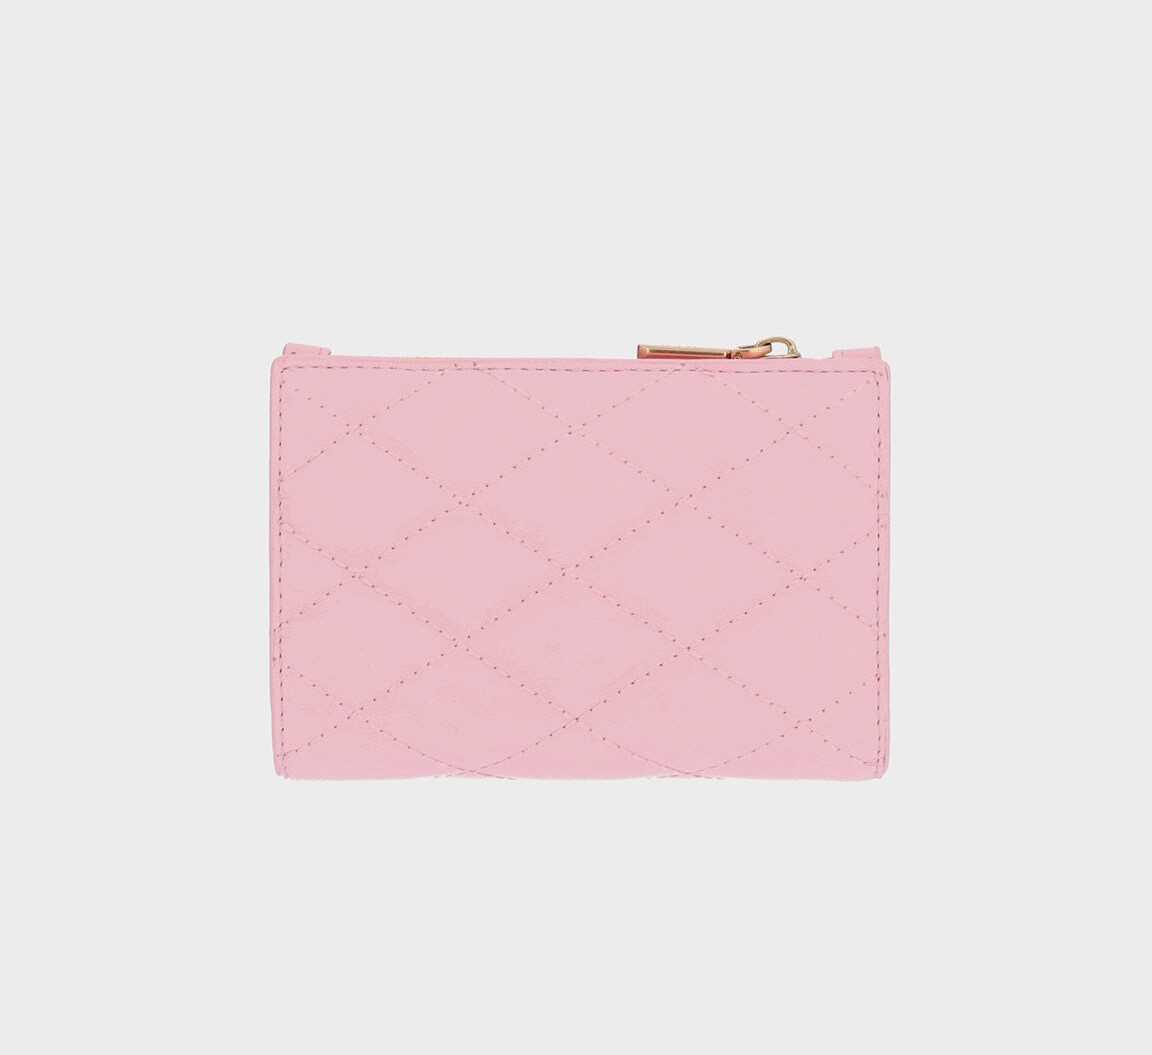 Chanel  Chanel Small Classic Flap Wallet Coral Pink Leather  Queen Station